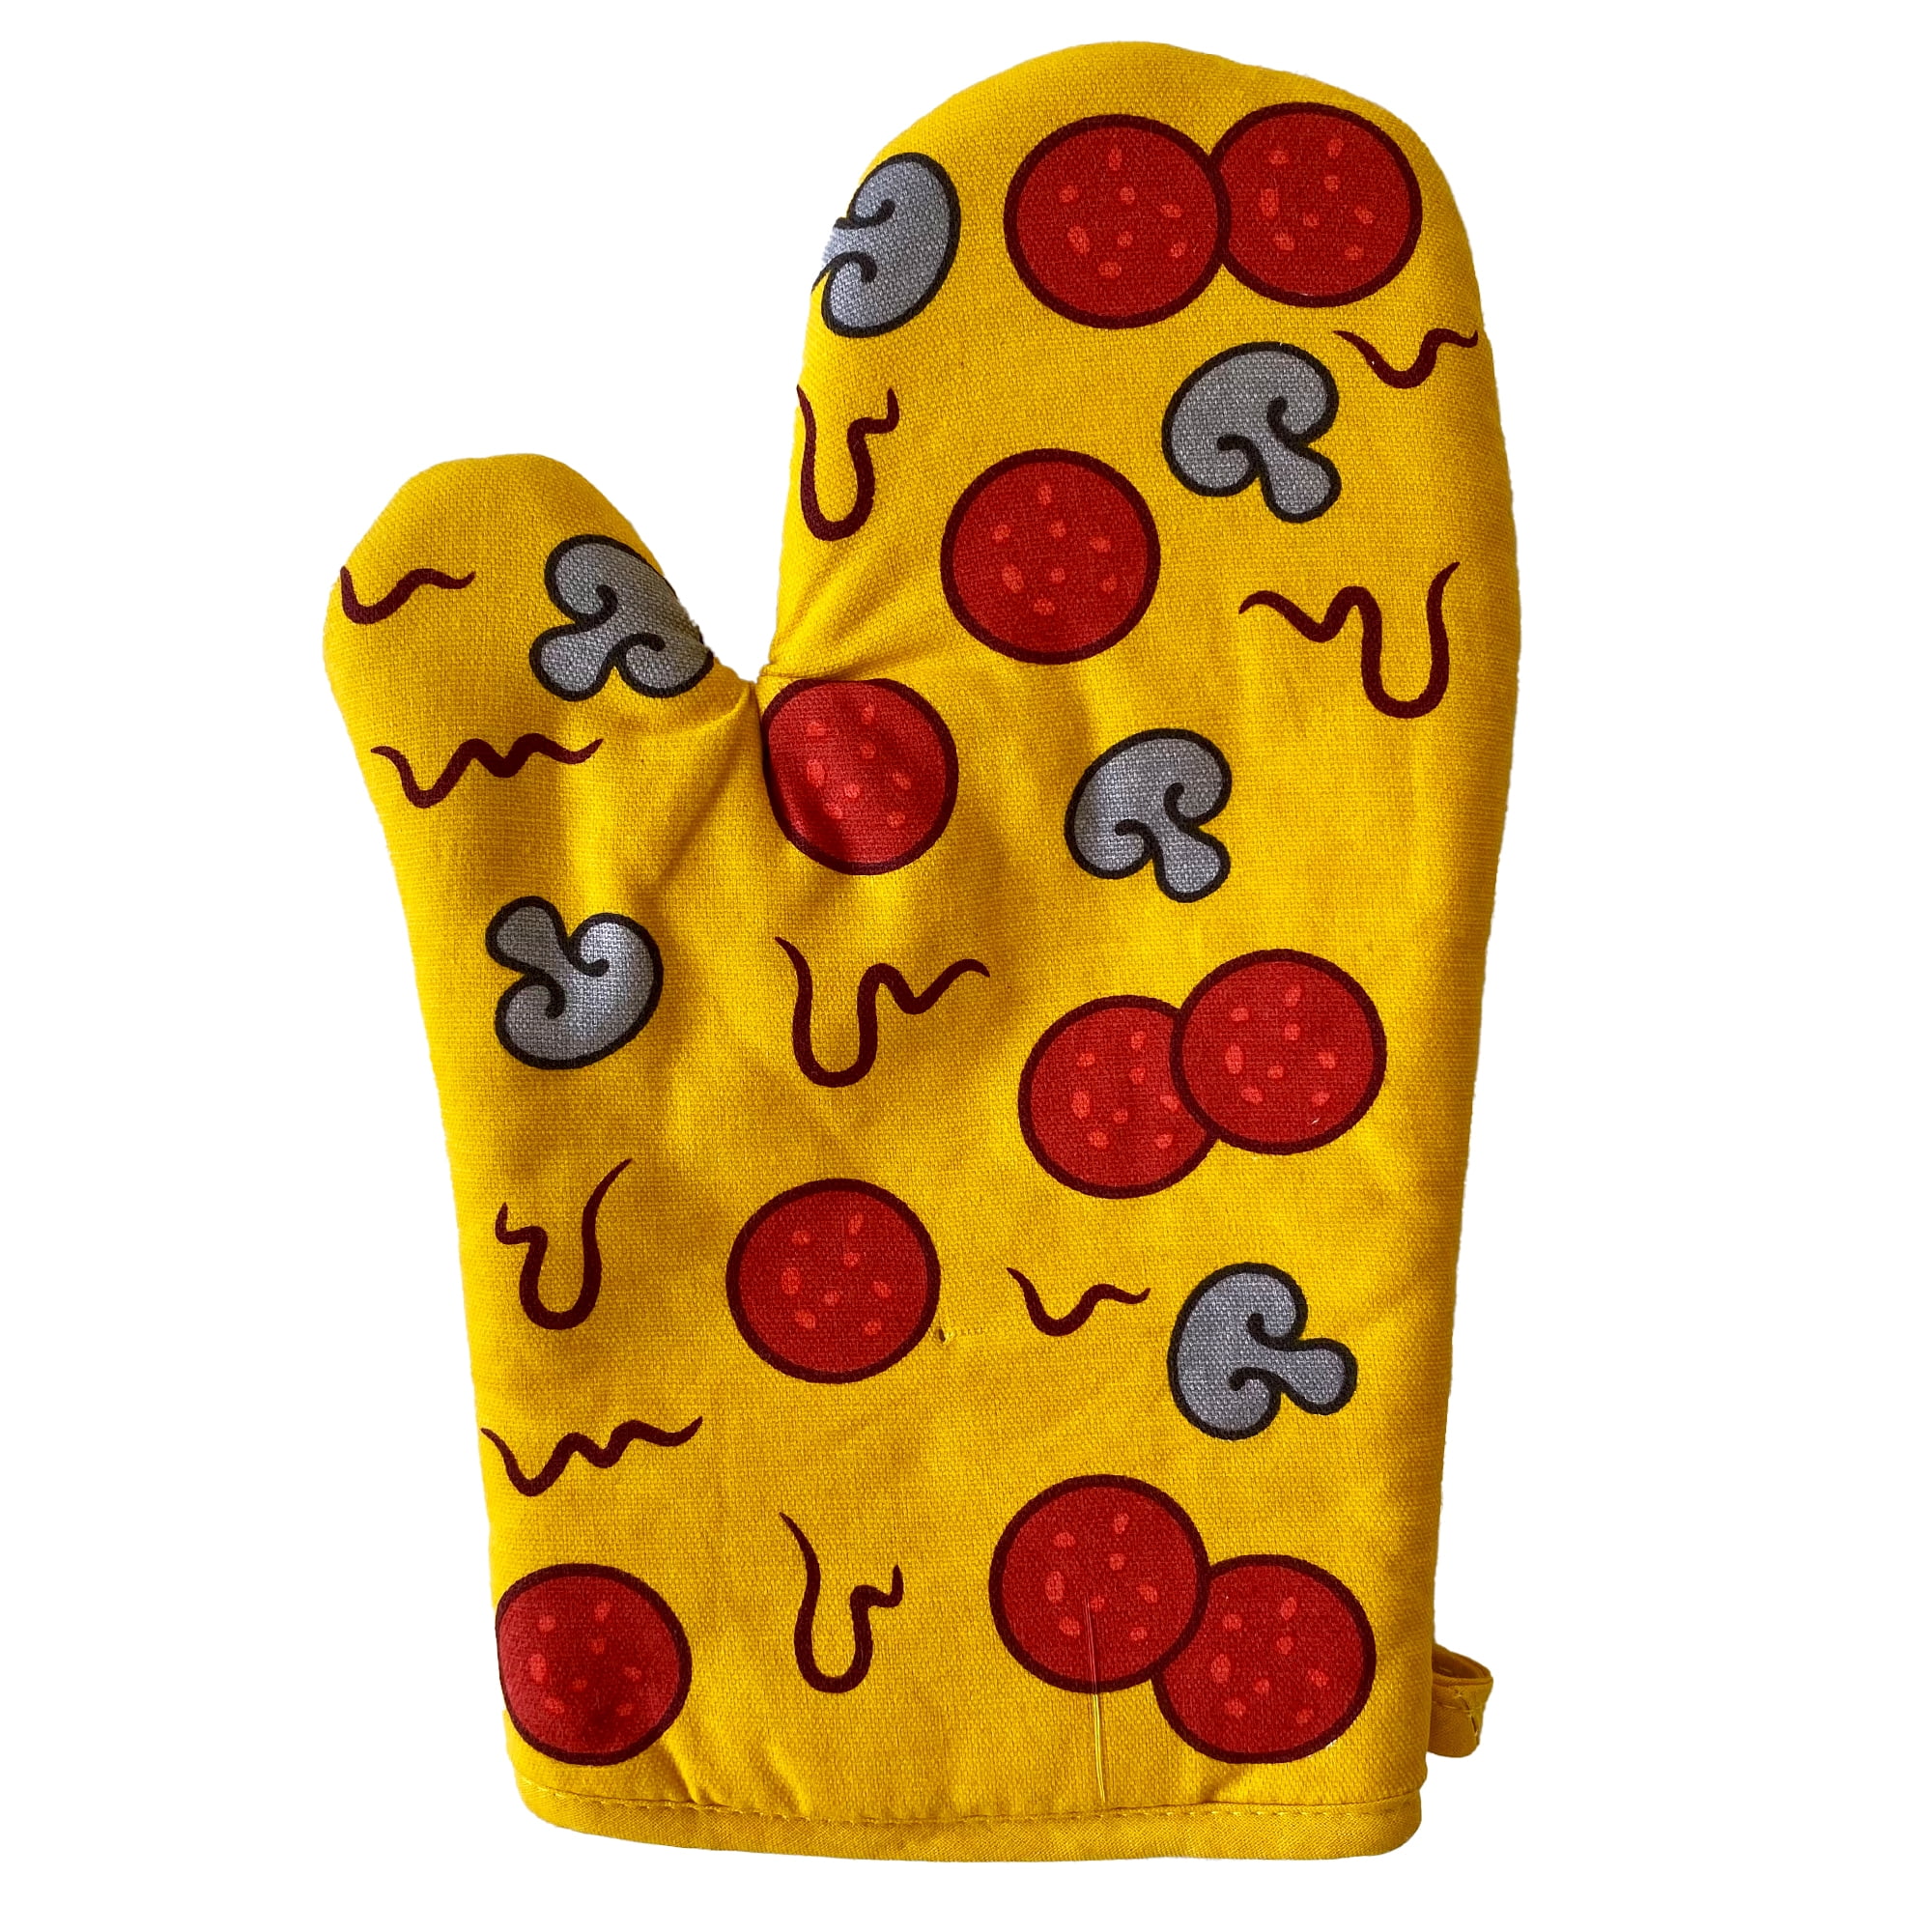 Don't Worry I Ordered Pizza Just In Case Funny Cooking Humor Graphic Novelty  Kitchen Accessories (Oven Mitt + Apron) 